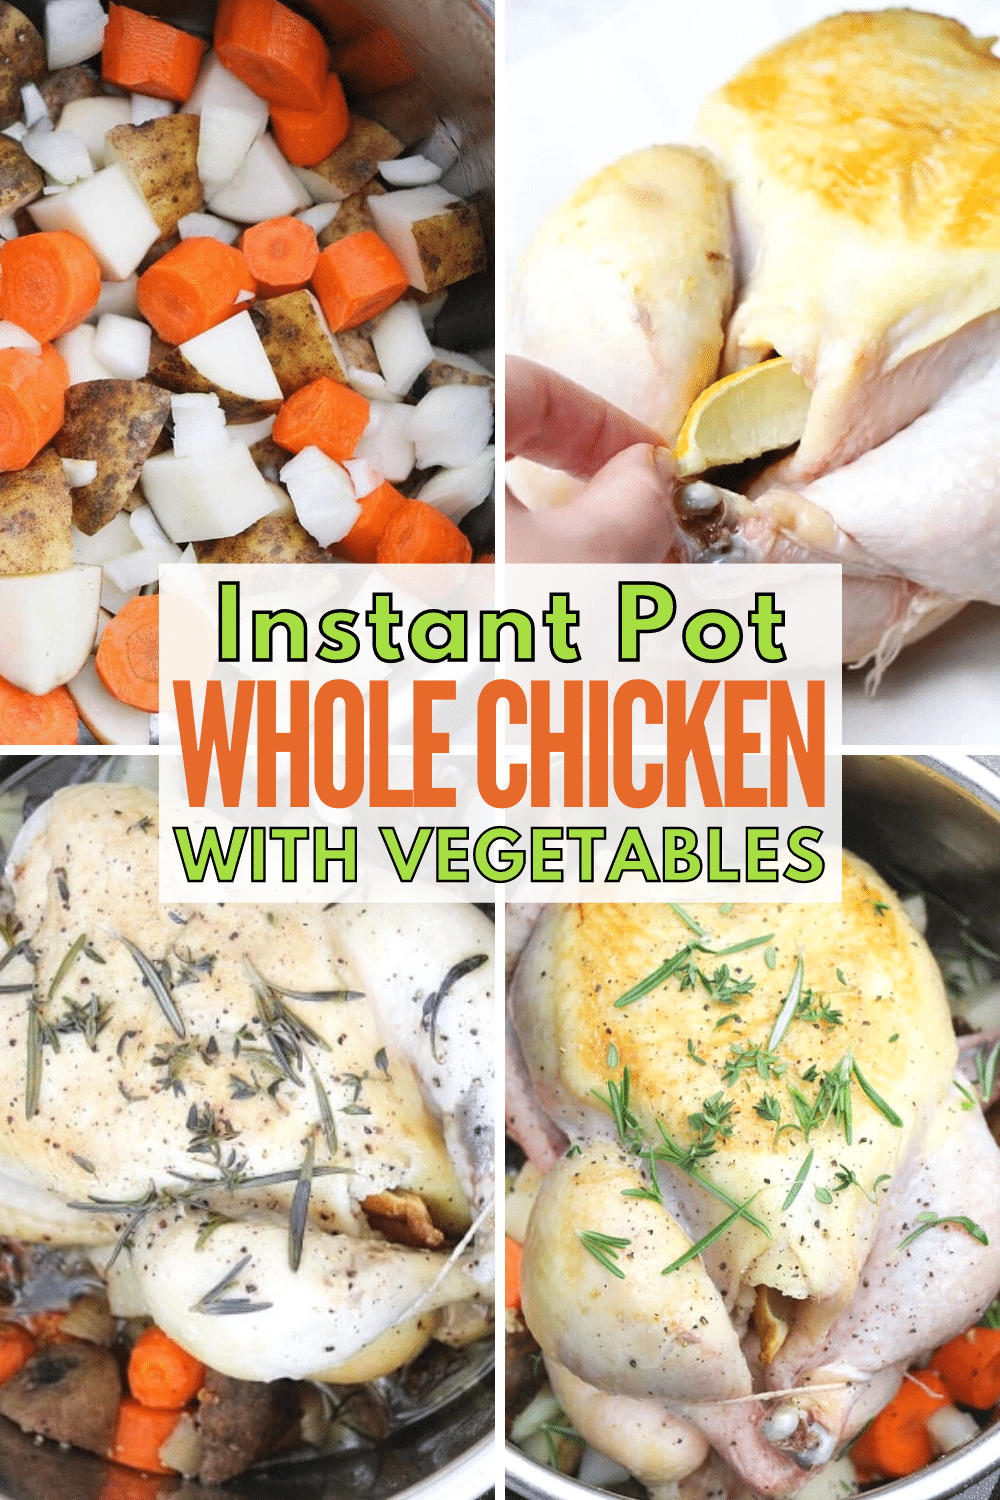 Instant Pot Whole Chicken with Vegetables is a complete meal that takes very little effort to prepare. Your family will love it! #instantpot #pressurecooker #wholechicken #dinner via @wondermomwannab